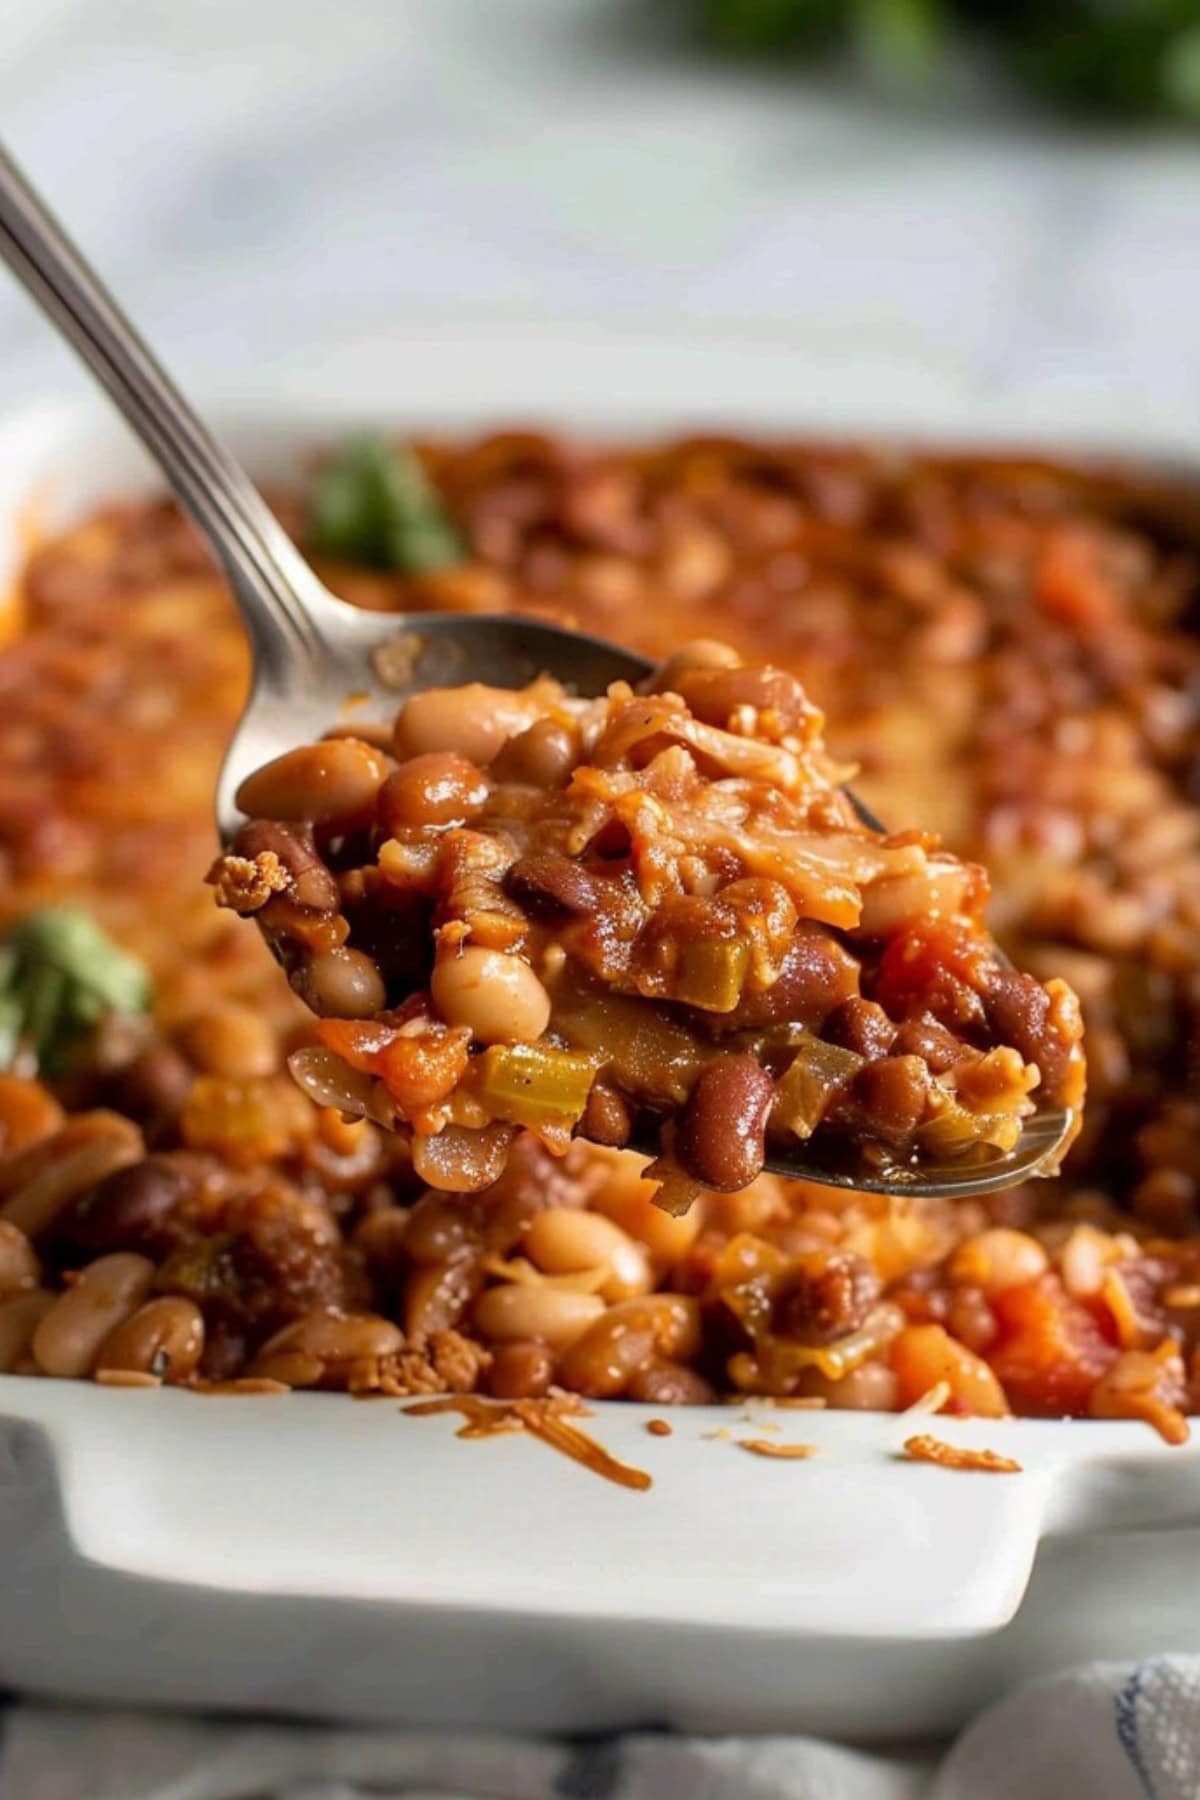 Spoonful of three bean casserole from baking dish.